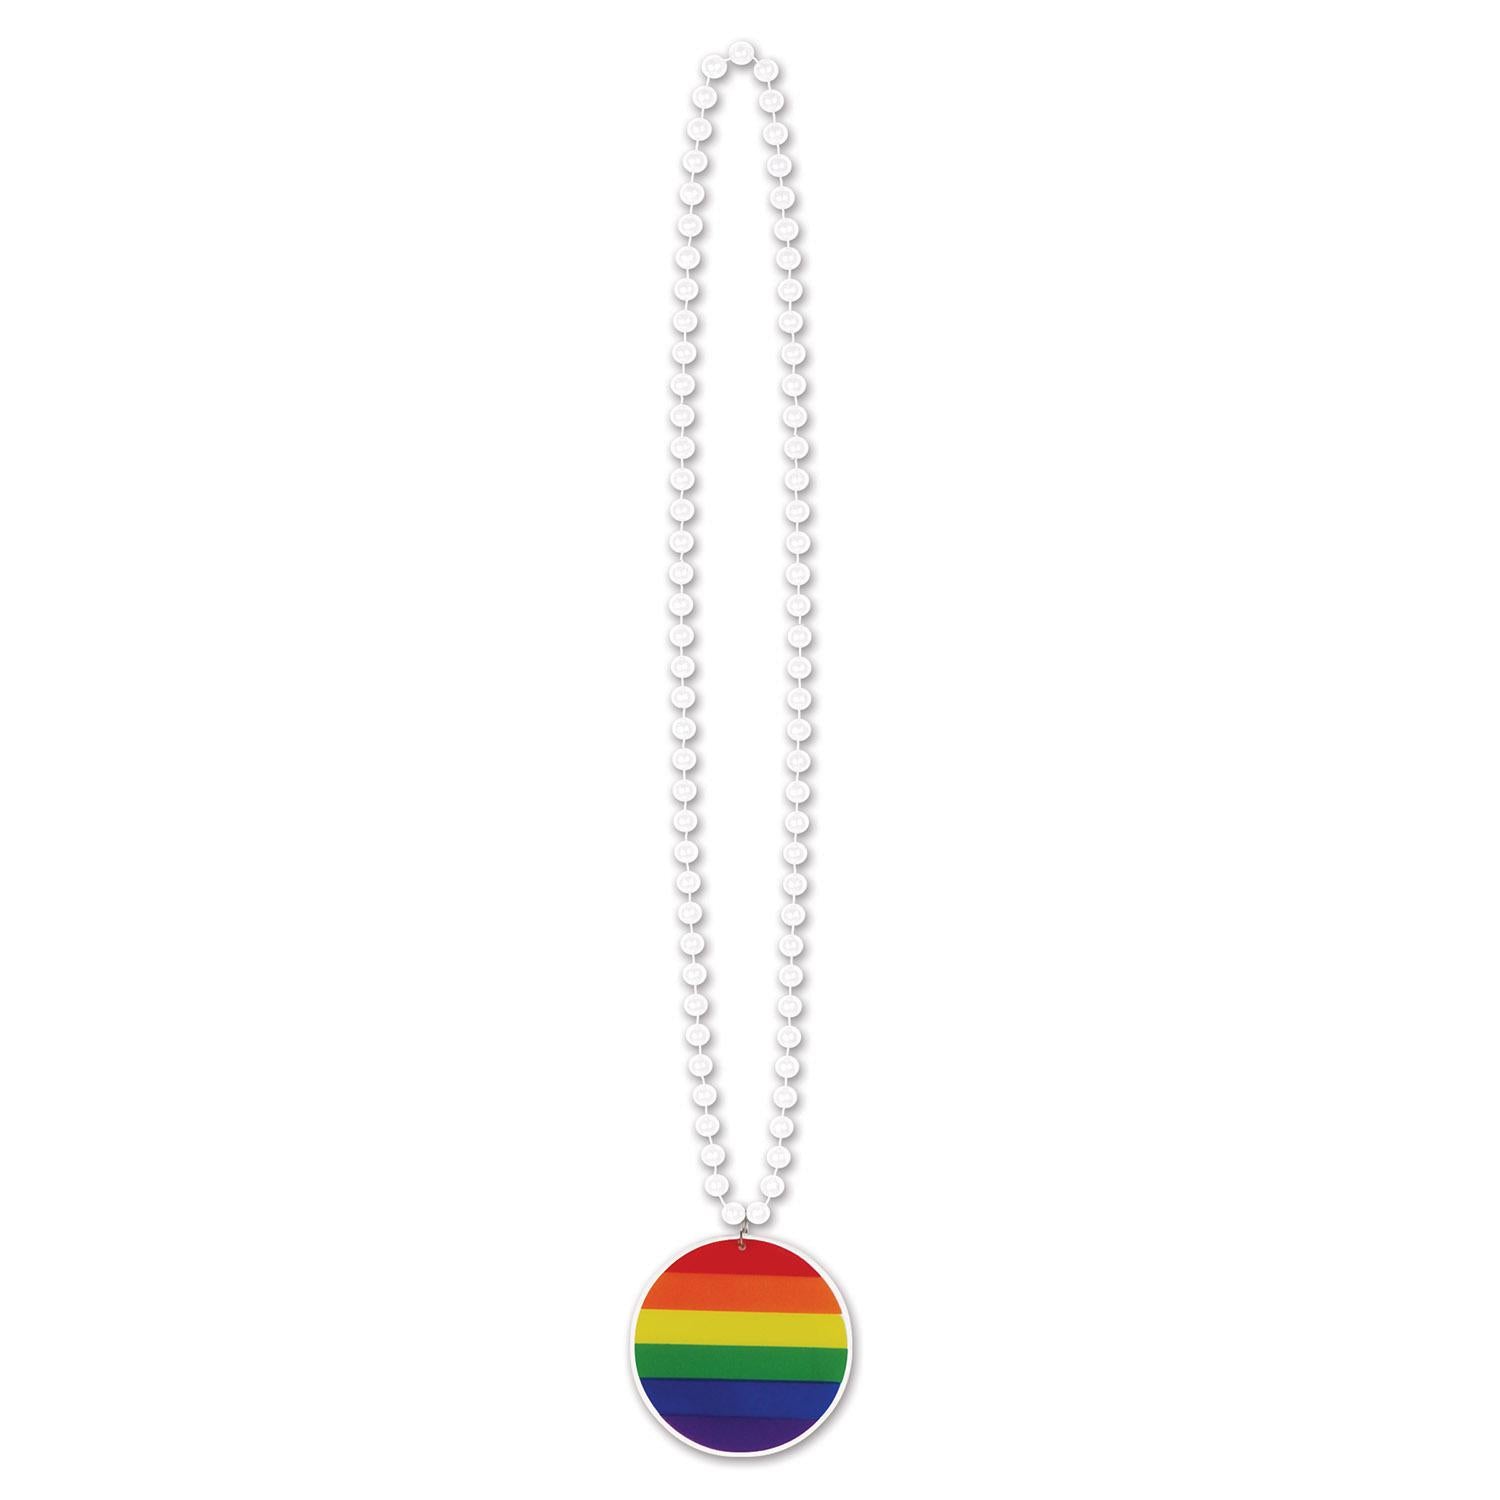 Beistle Bead Necklaces with Printed Rainbow Party Medallion